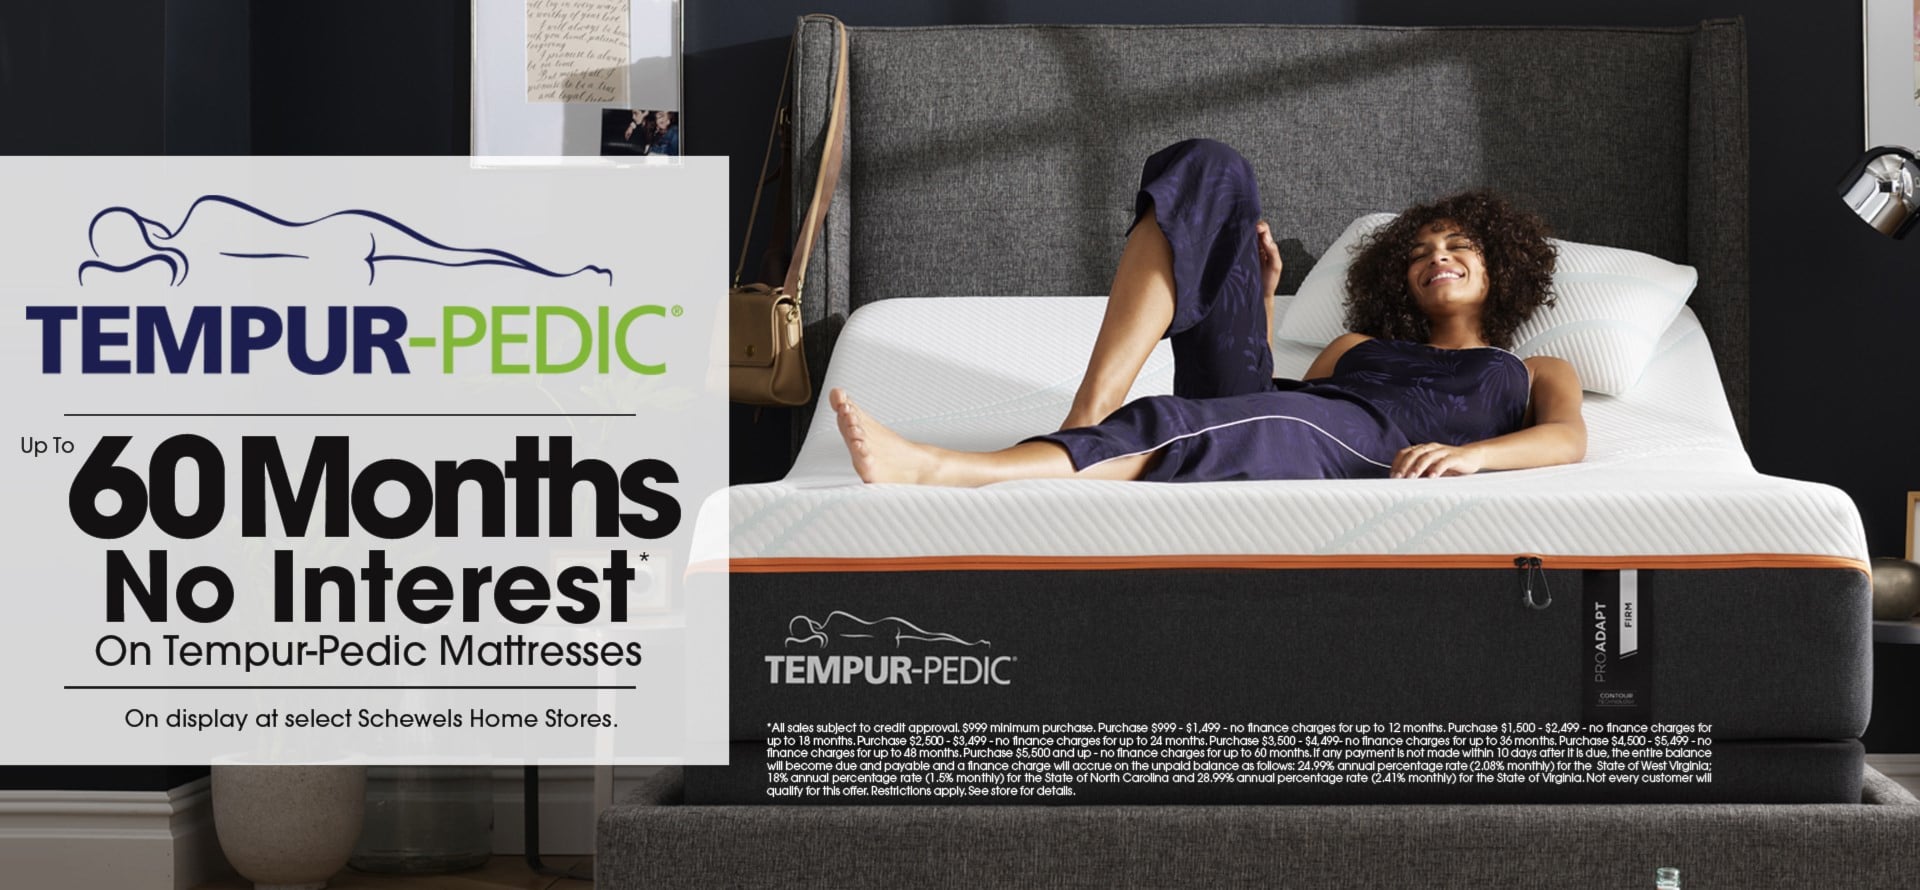 Tempur Pedic | Up to 60 Months No Interest* On Tempur-Pedic Mattresses. On display at select Schewels Home Stores..